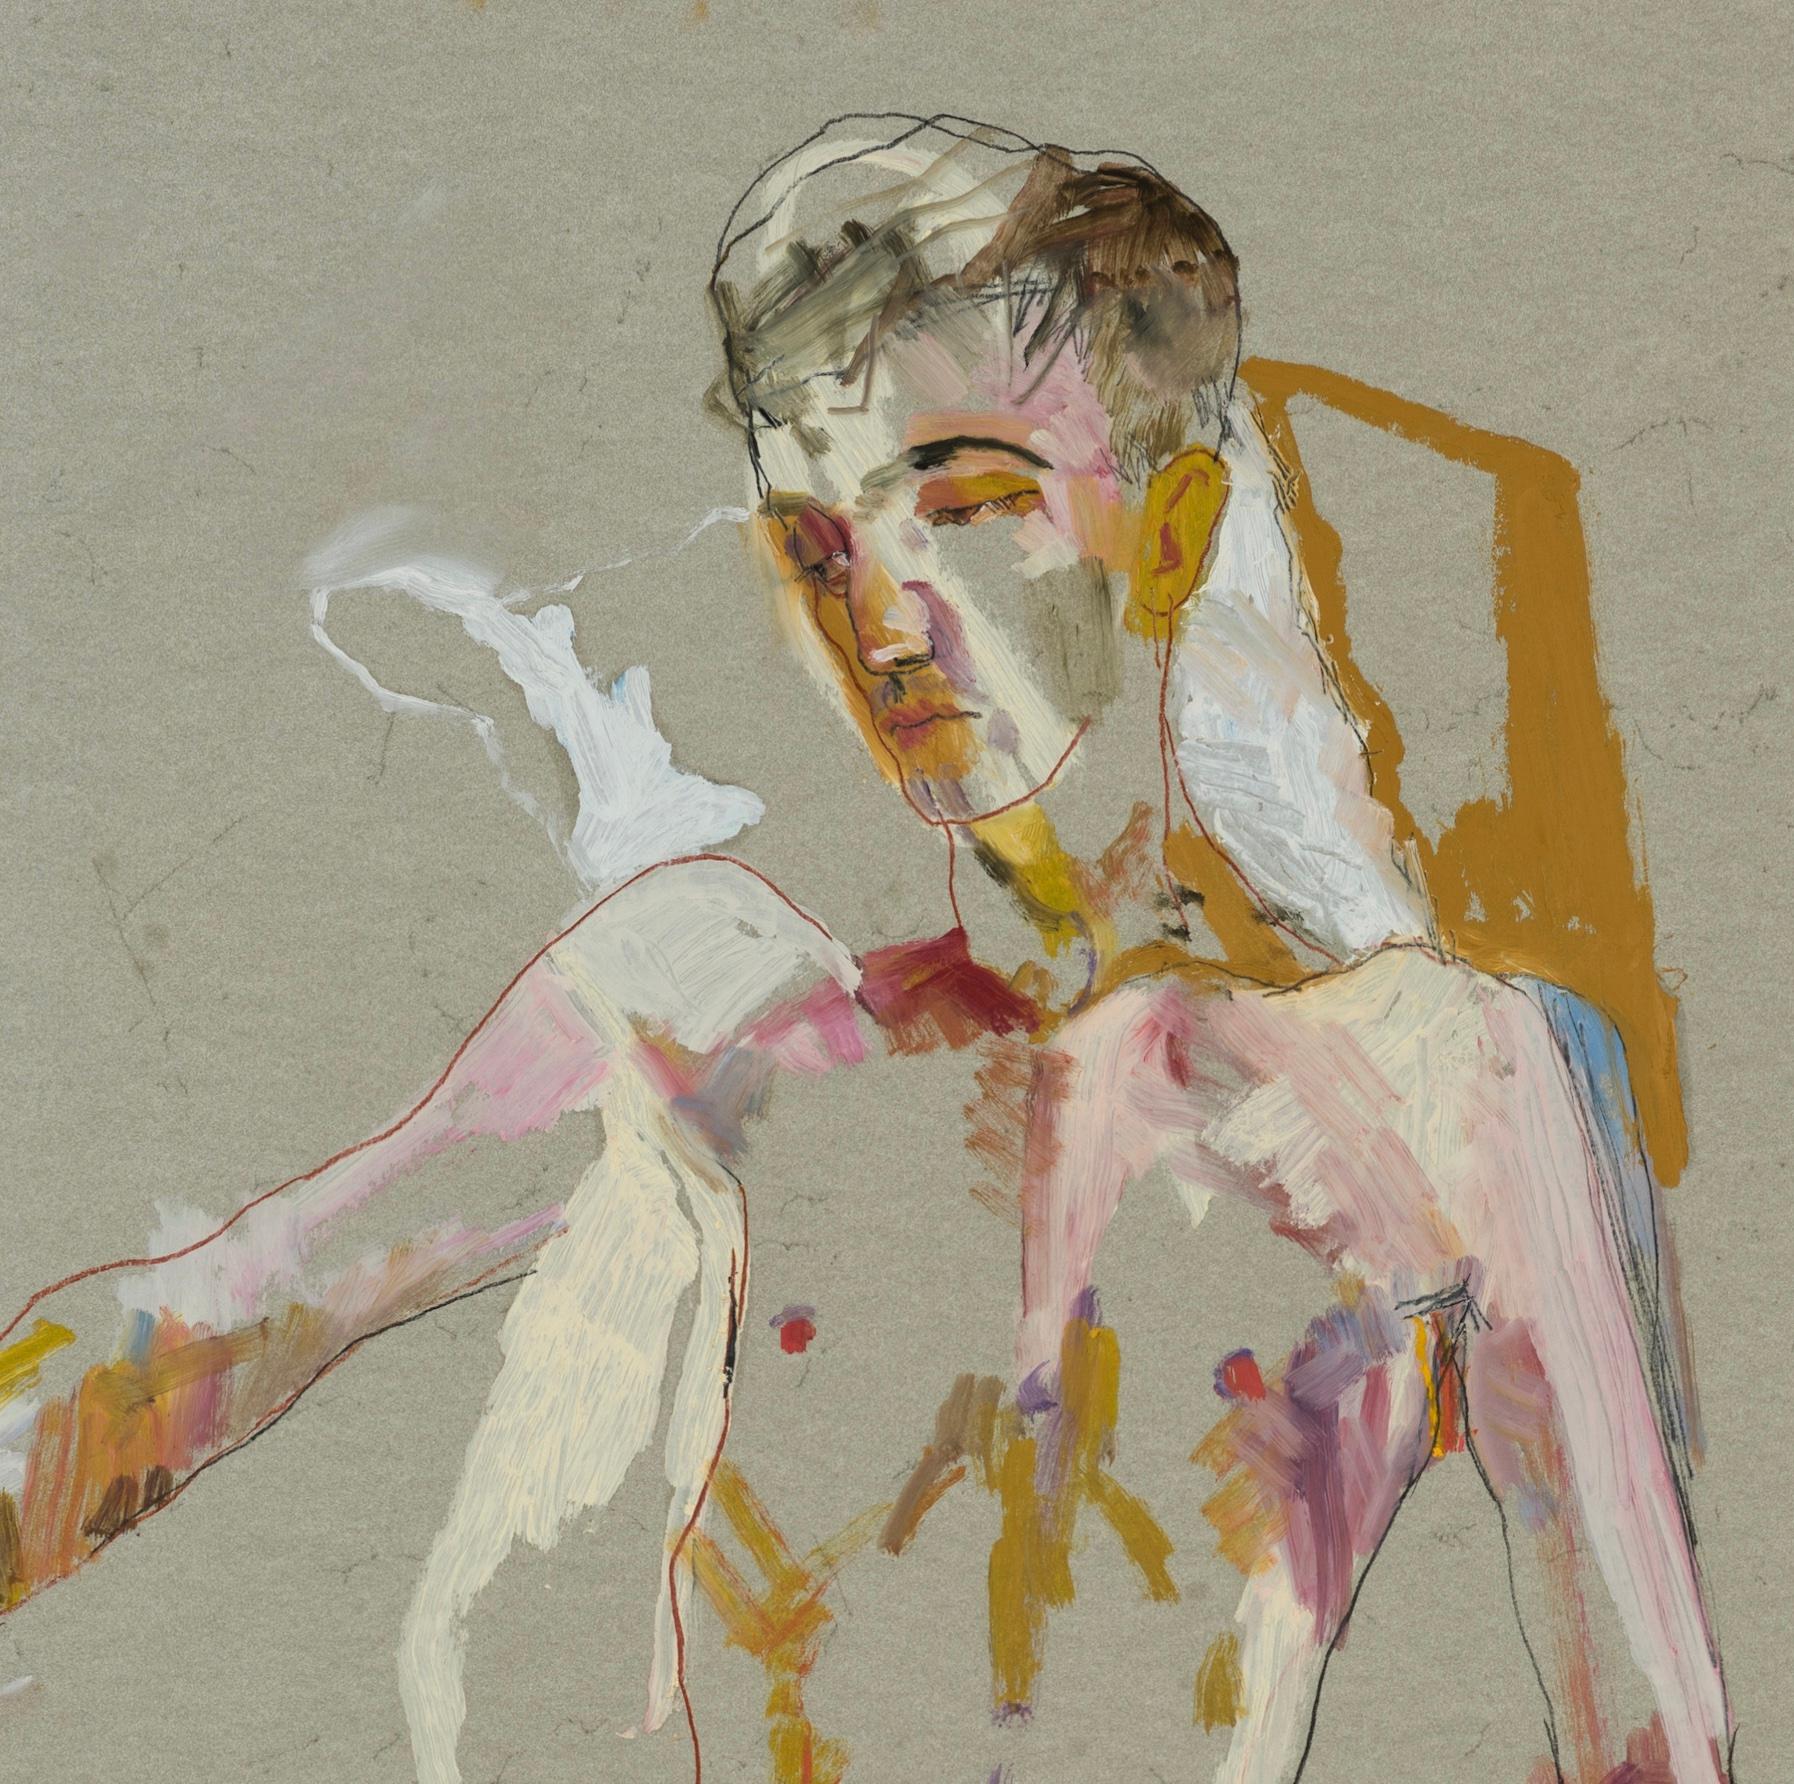 Andrew (Sitting, Arms Open - Black Shorts), Mixed media on grey parchment - Gray Figurative Art by Howard Tangye